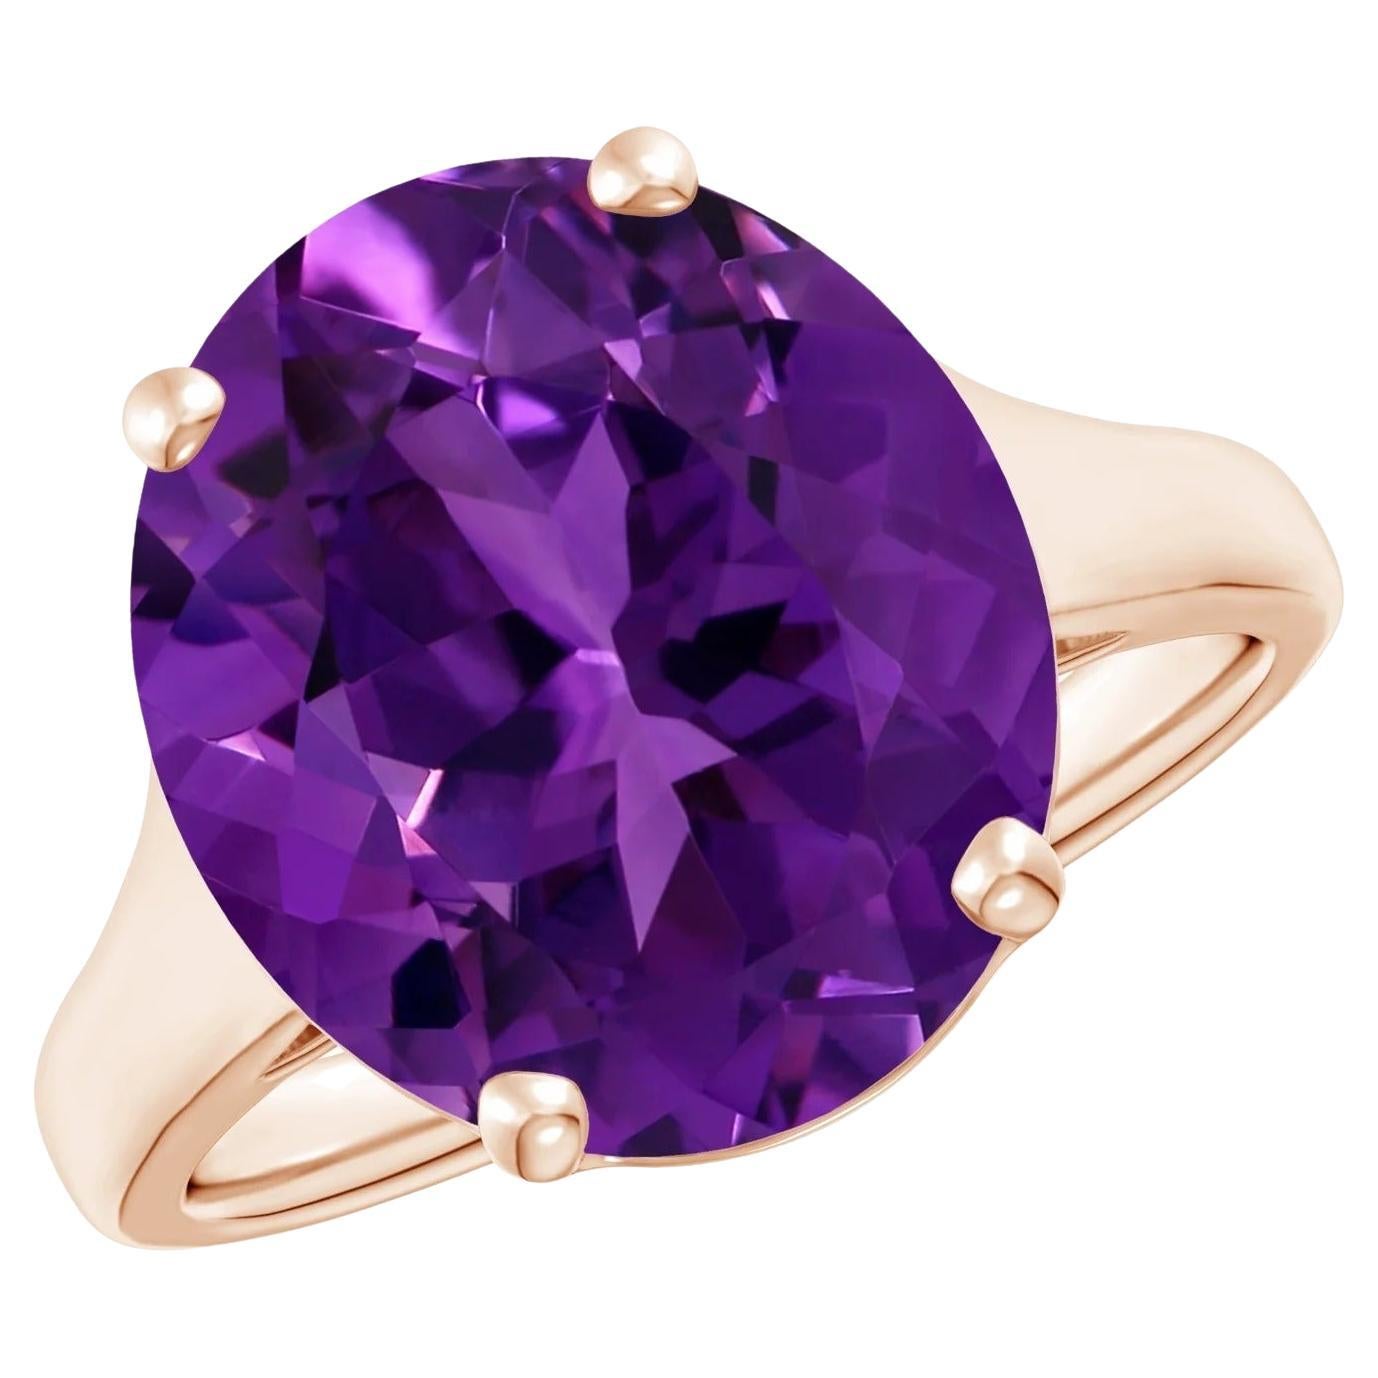 For Sale:  GIA Certified Natural Flat Amethyst Solitaire Ring in Yellow Gold